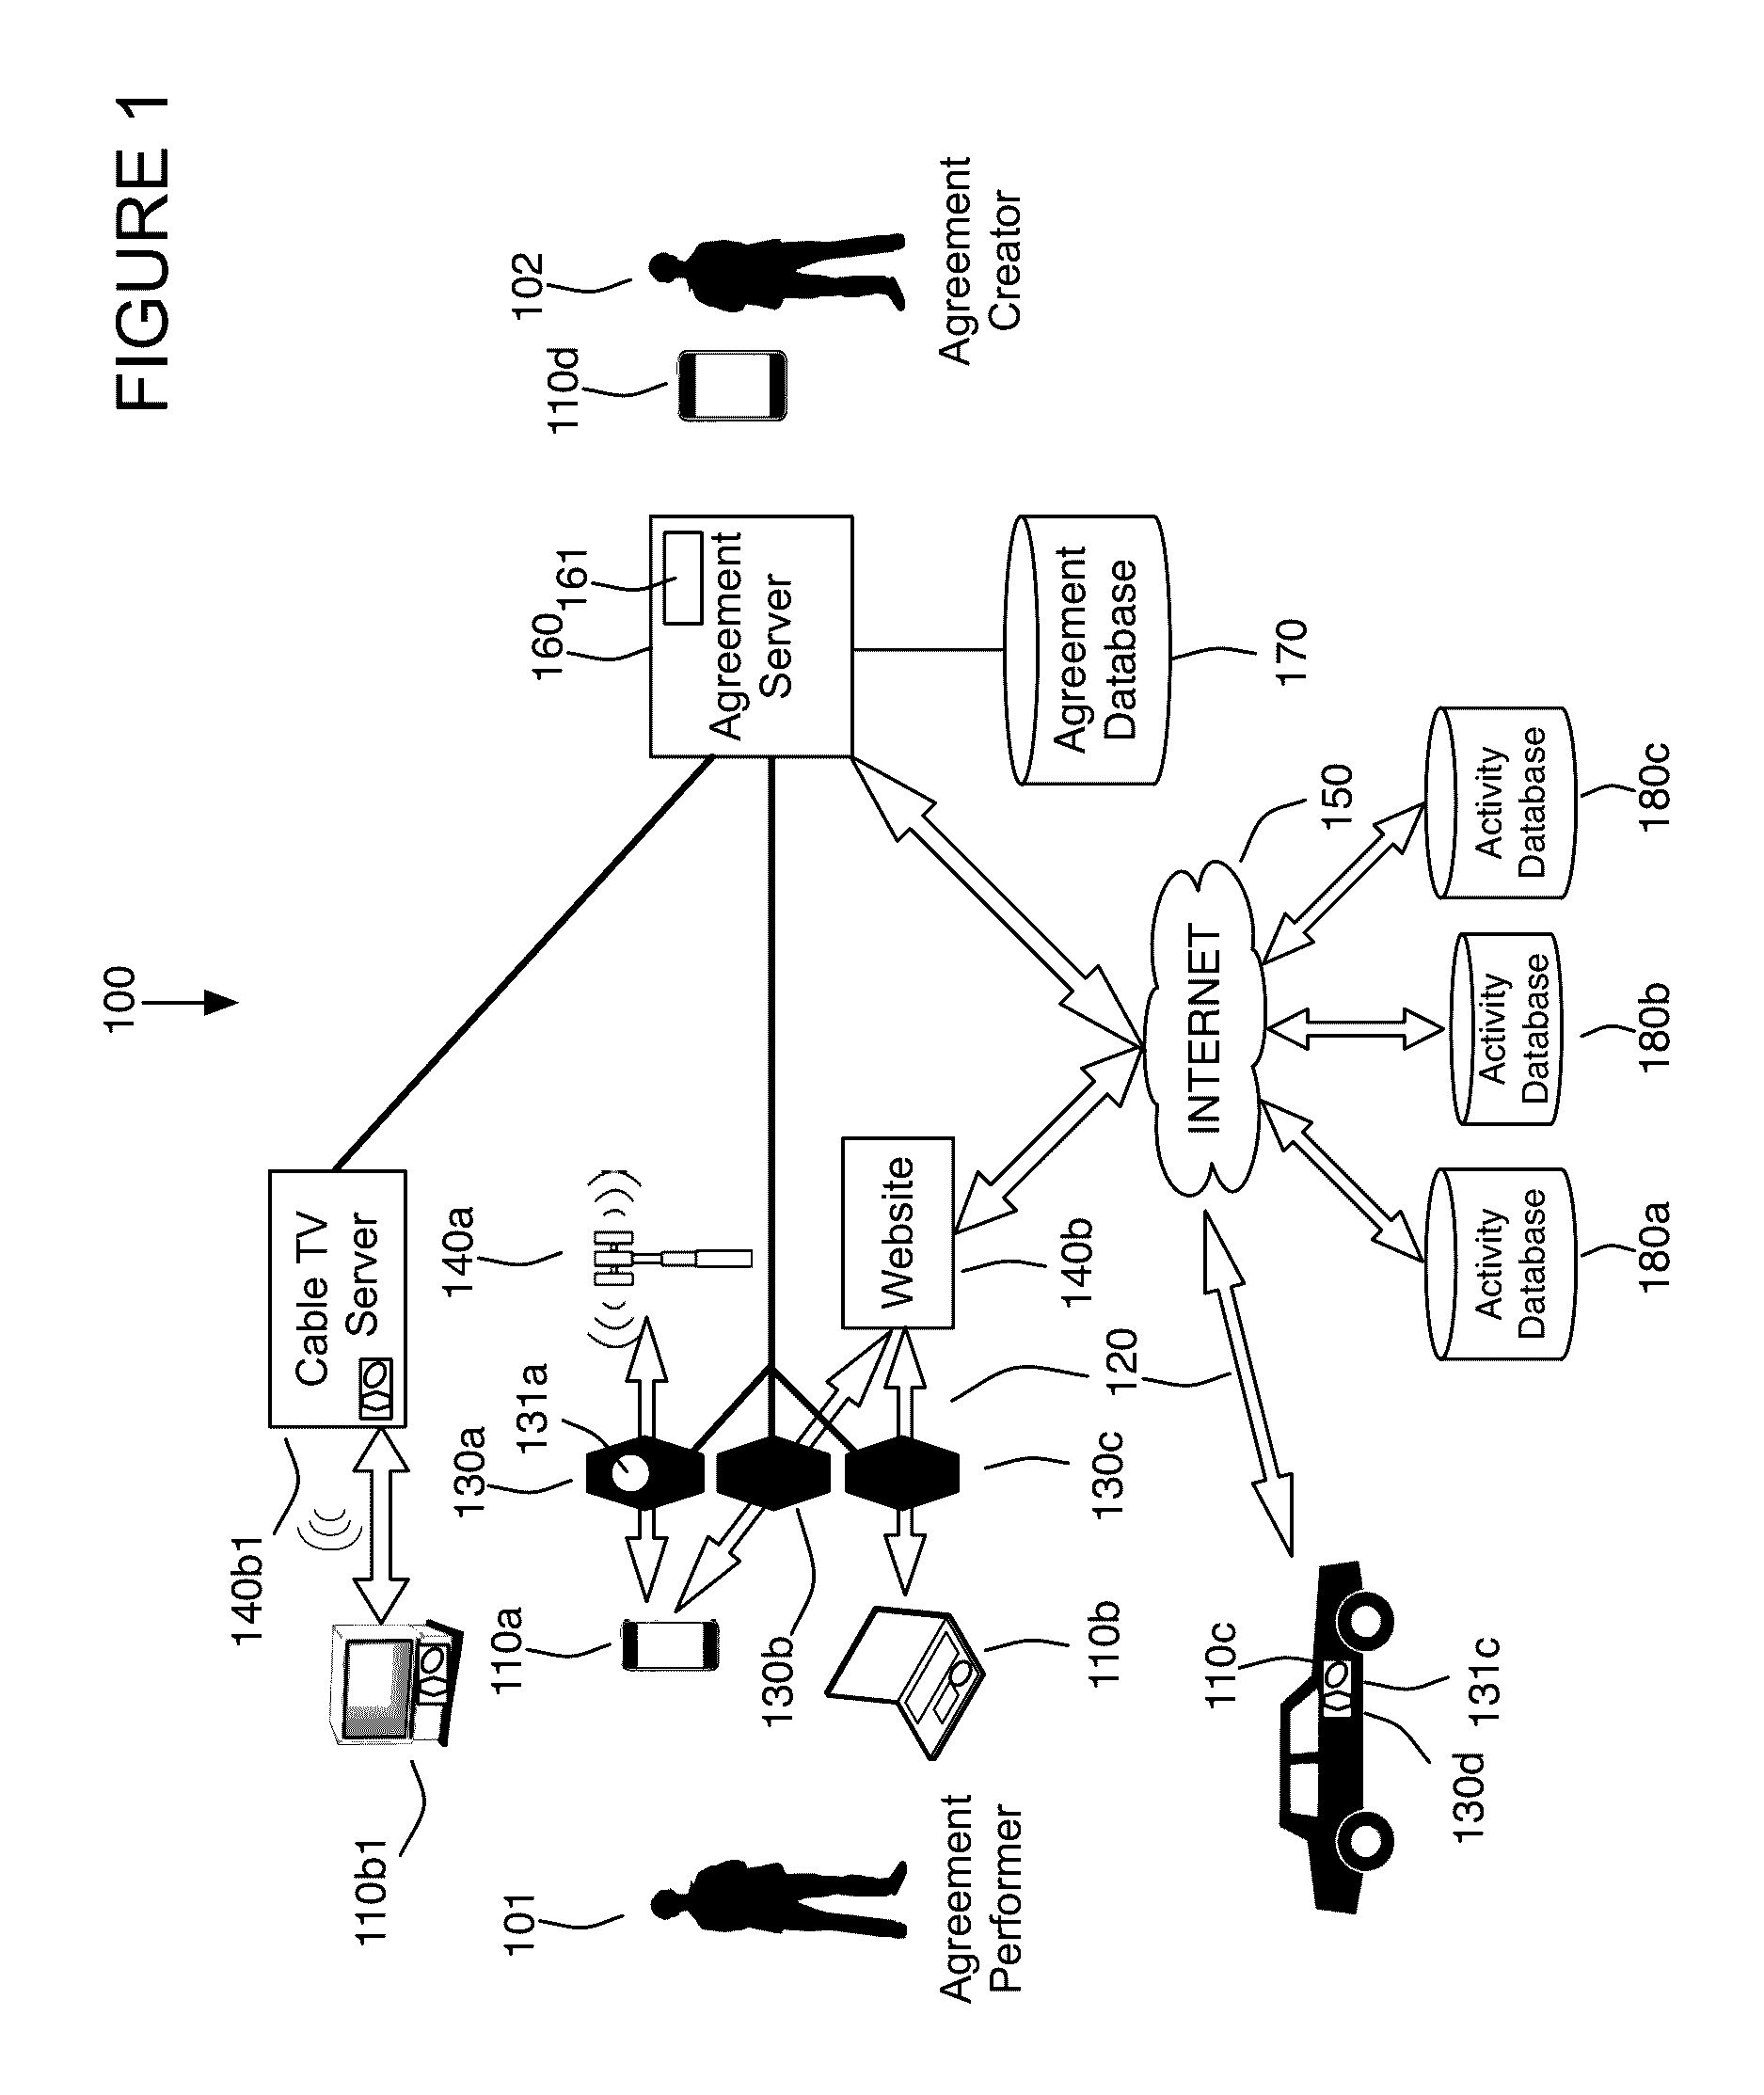 Information throttle based on compliance with electronic communication rules